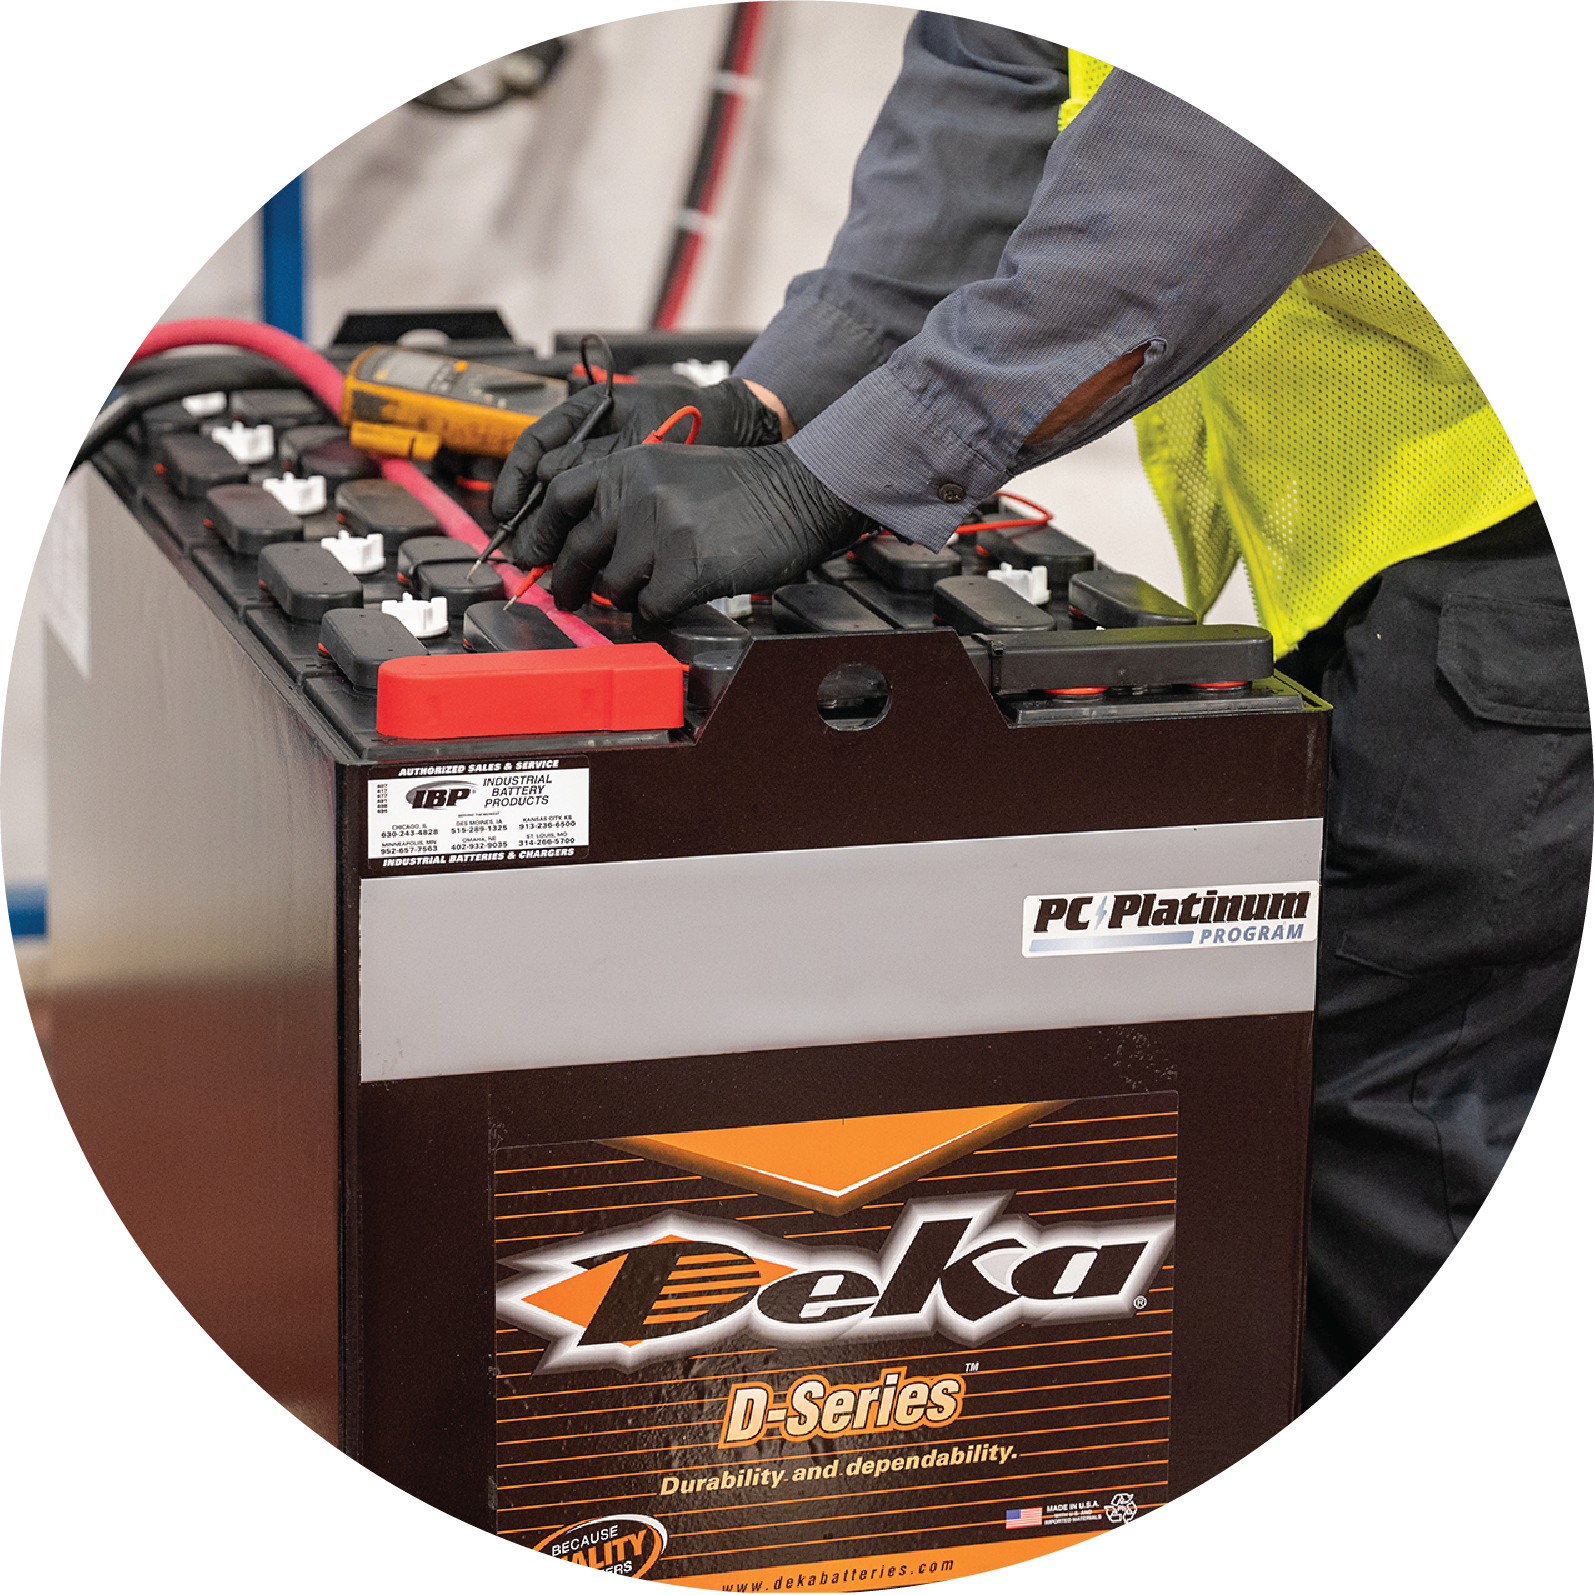 A Deka D-series battery provided by IBP's power management program, being used by a man with gloves on